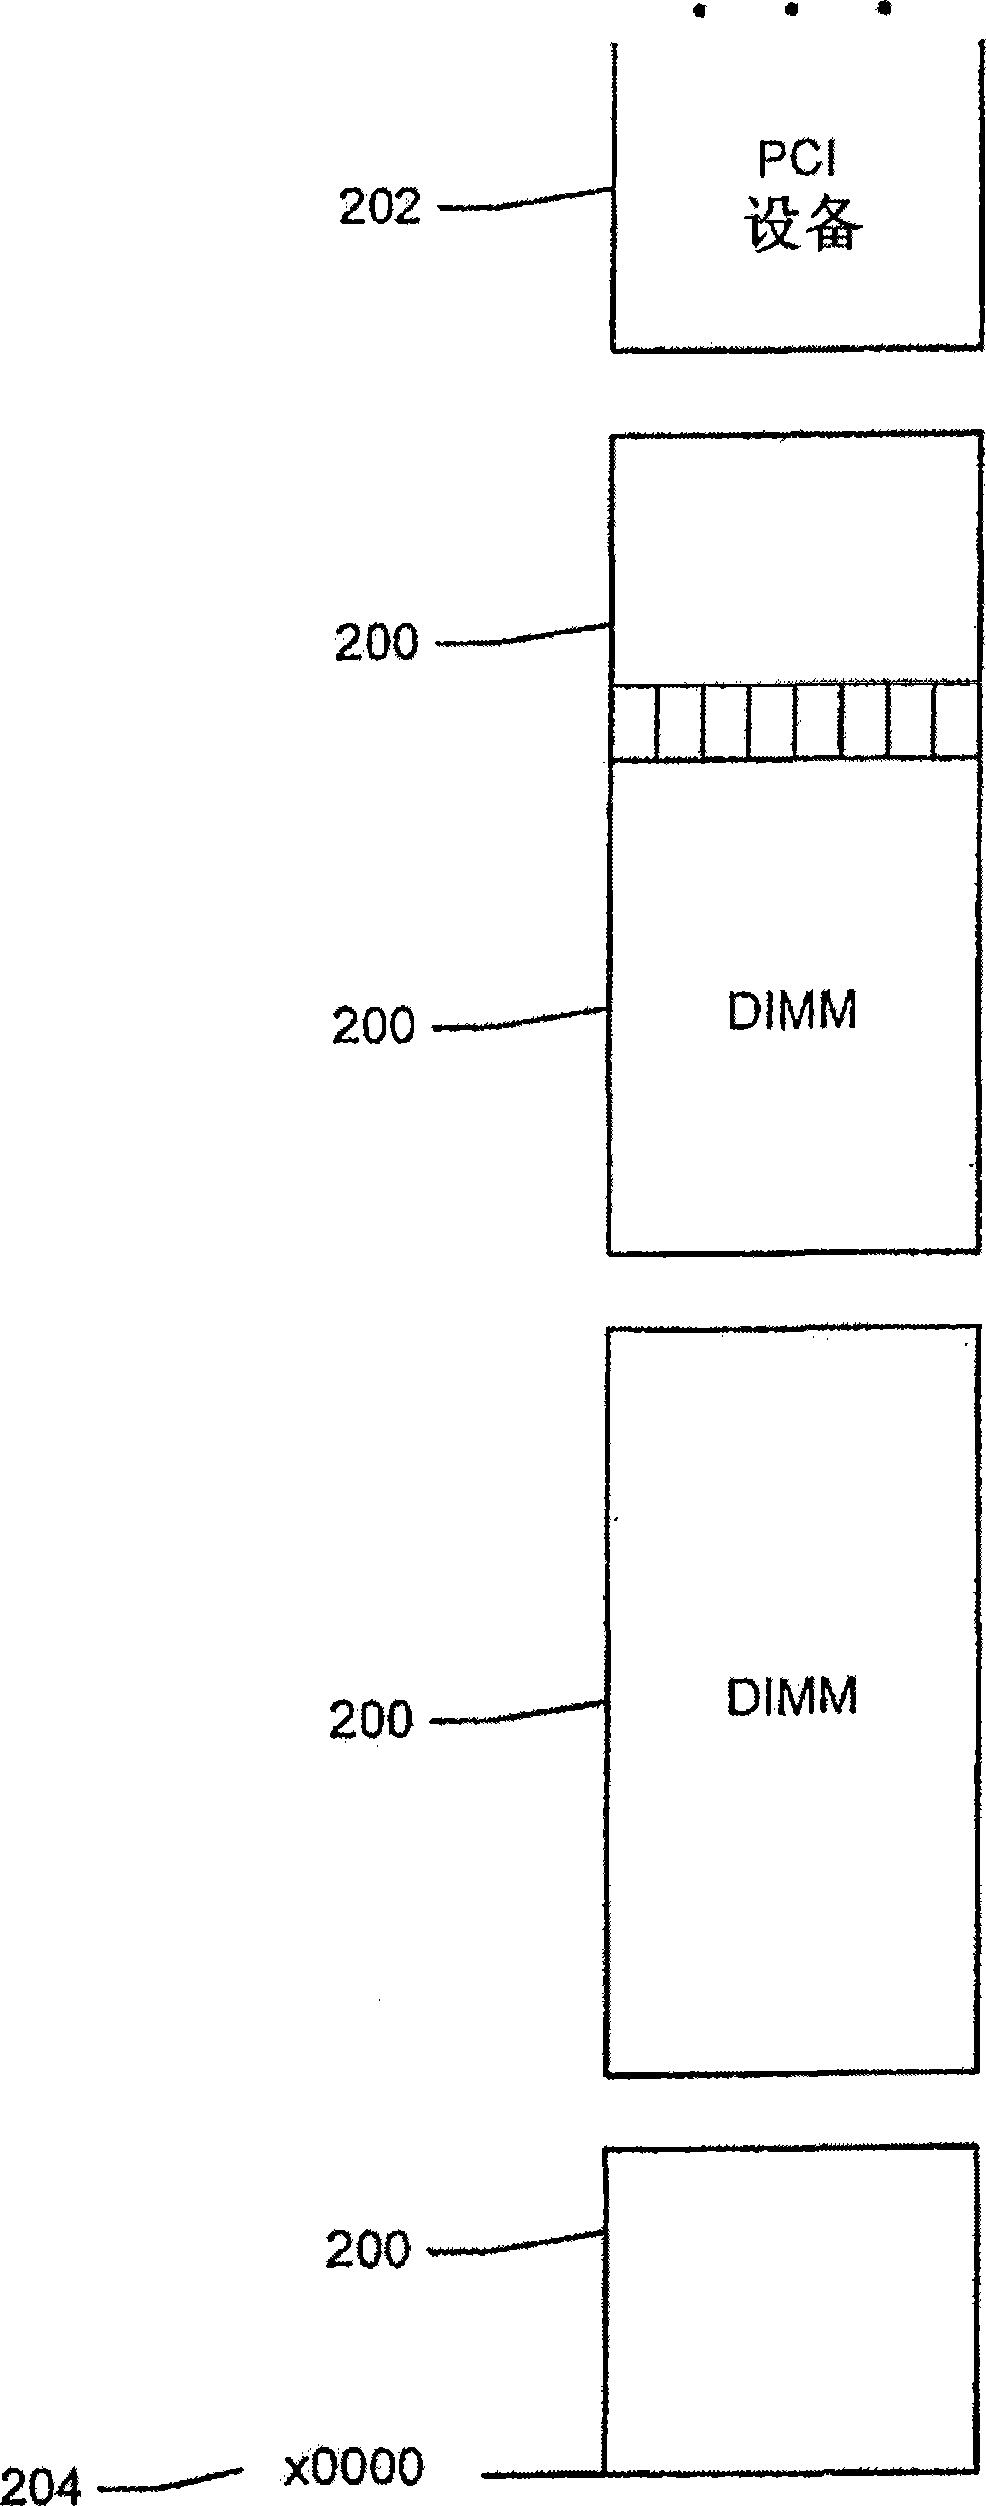 Method for creating a memory defect map and optimizing performance using the memory defect map